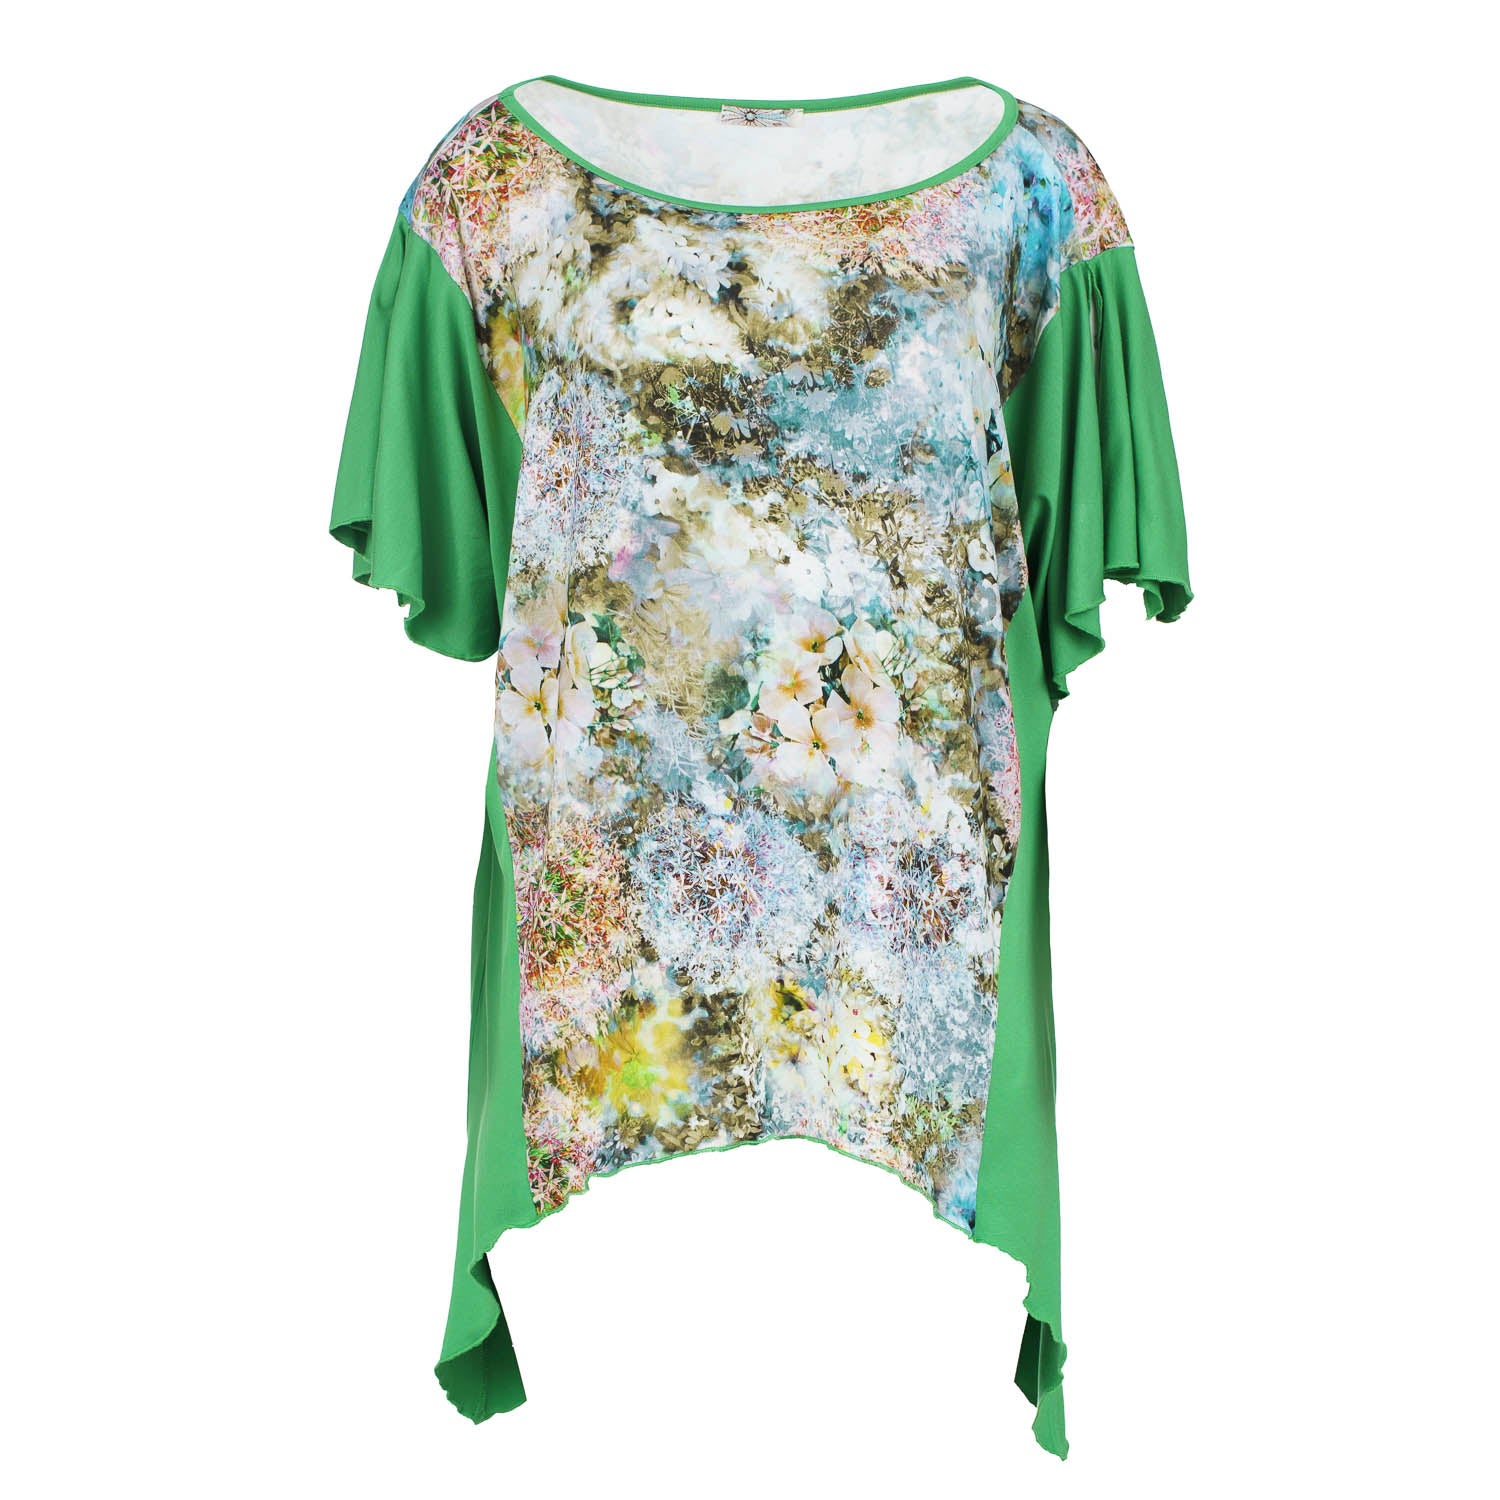 Women’s Green Print Stretch Jersey Top With A Pointed Hemline Plus Size Small Conquista